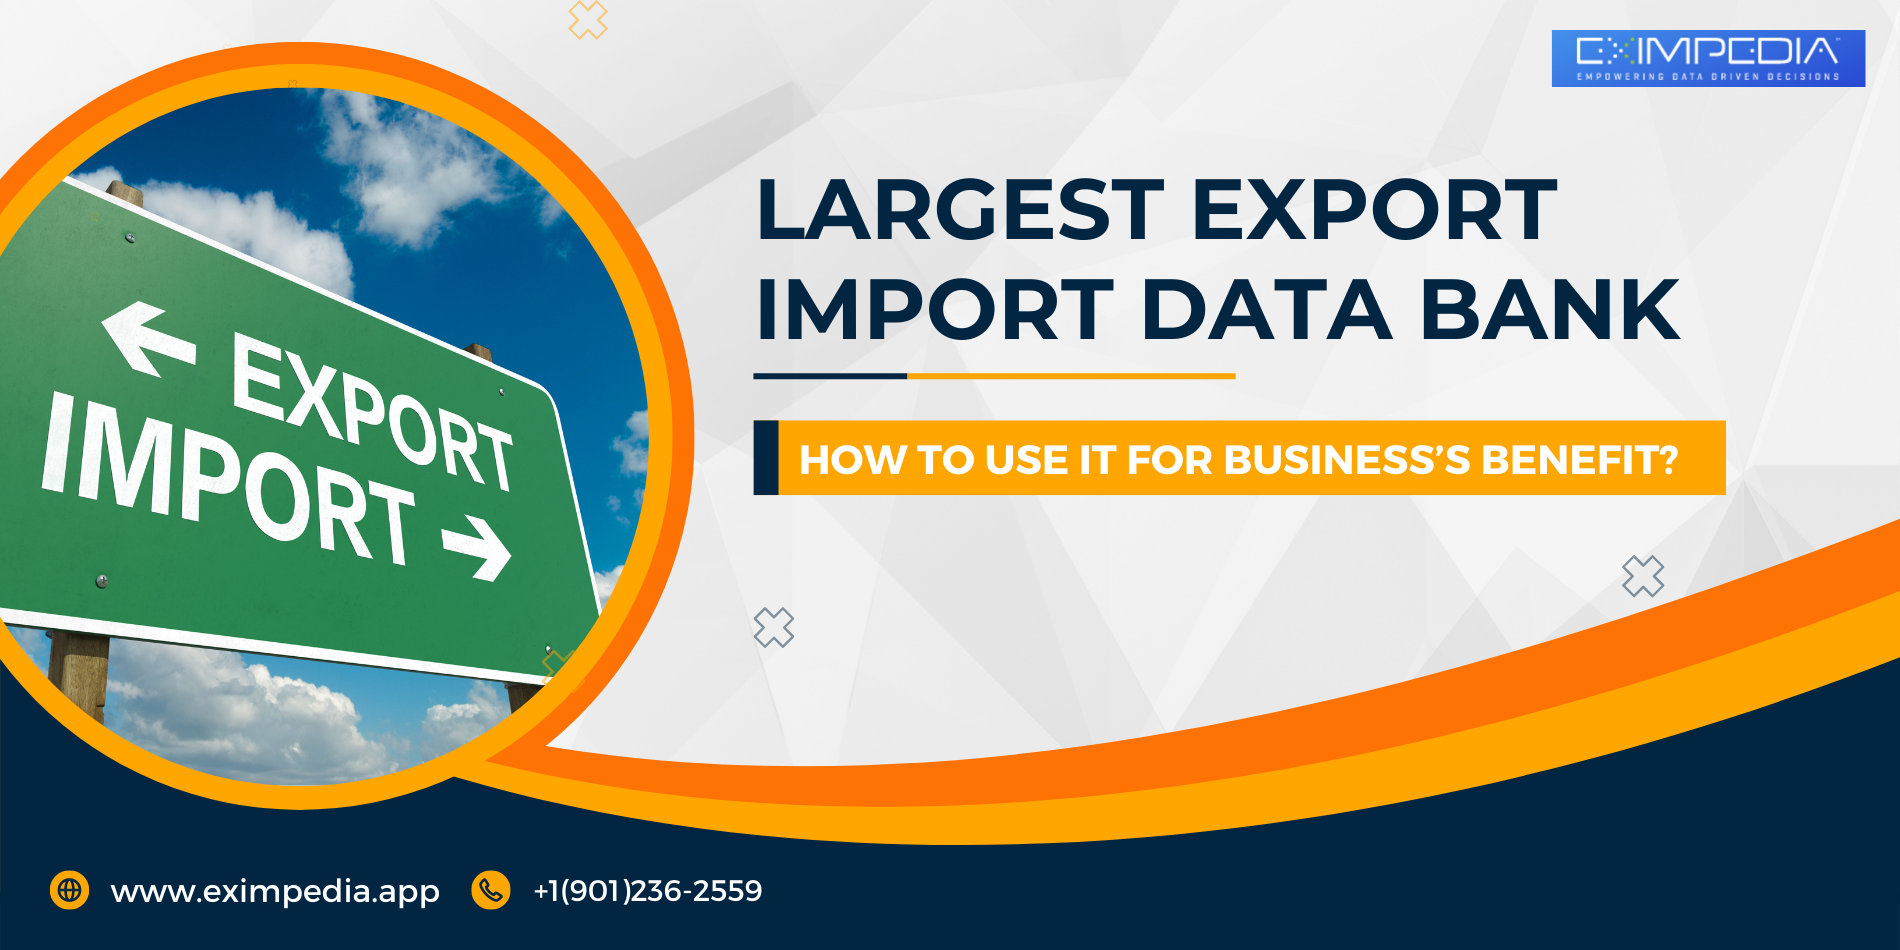 What is the largest Export Import Data Bank? How to use it for business’s benefit?